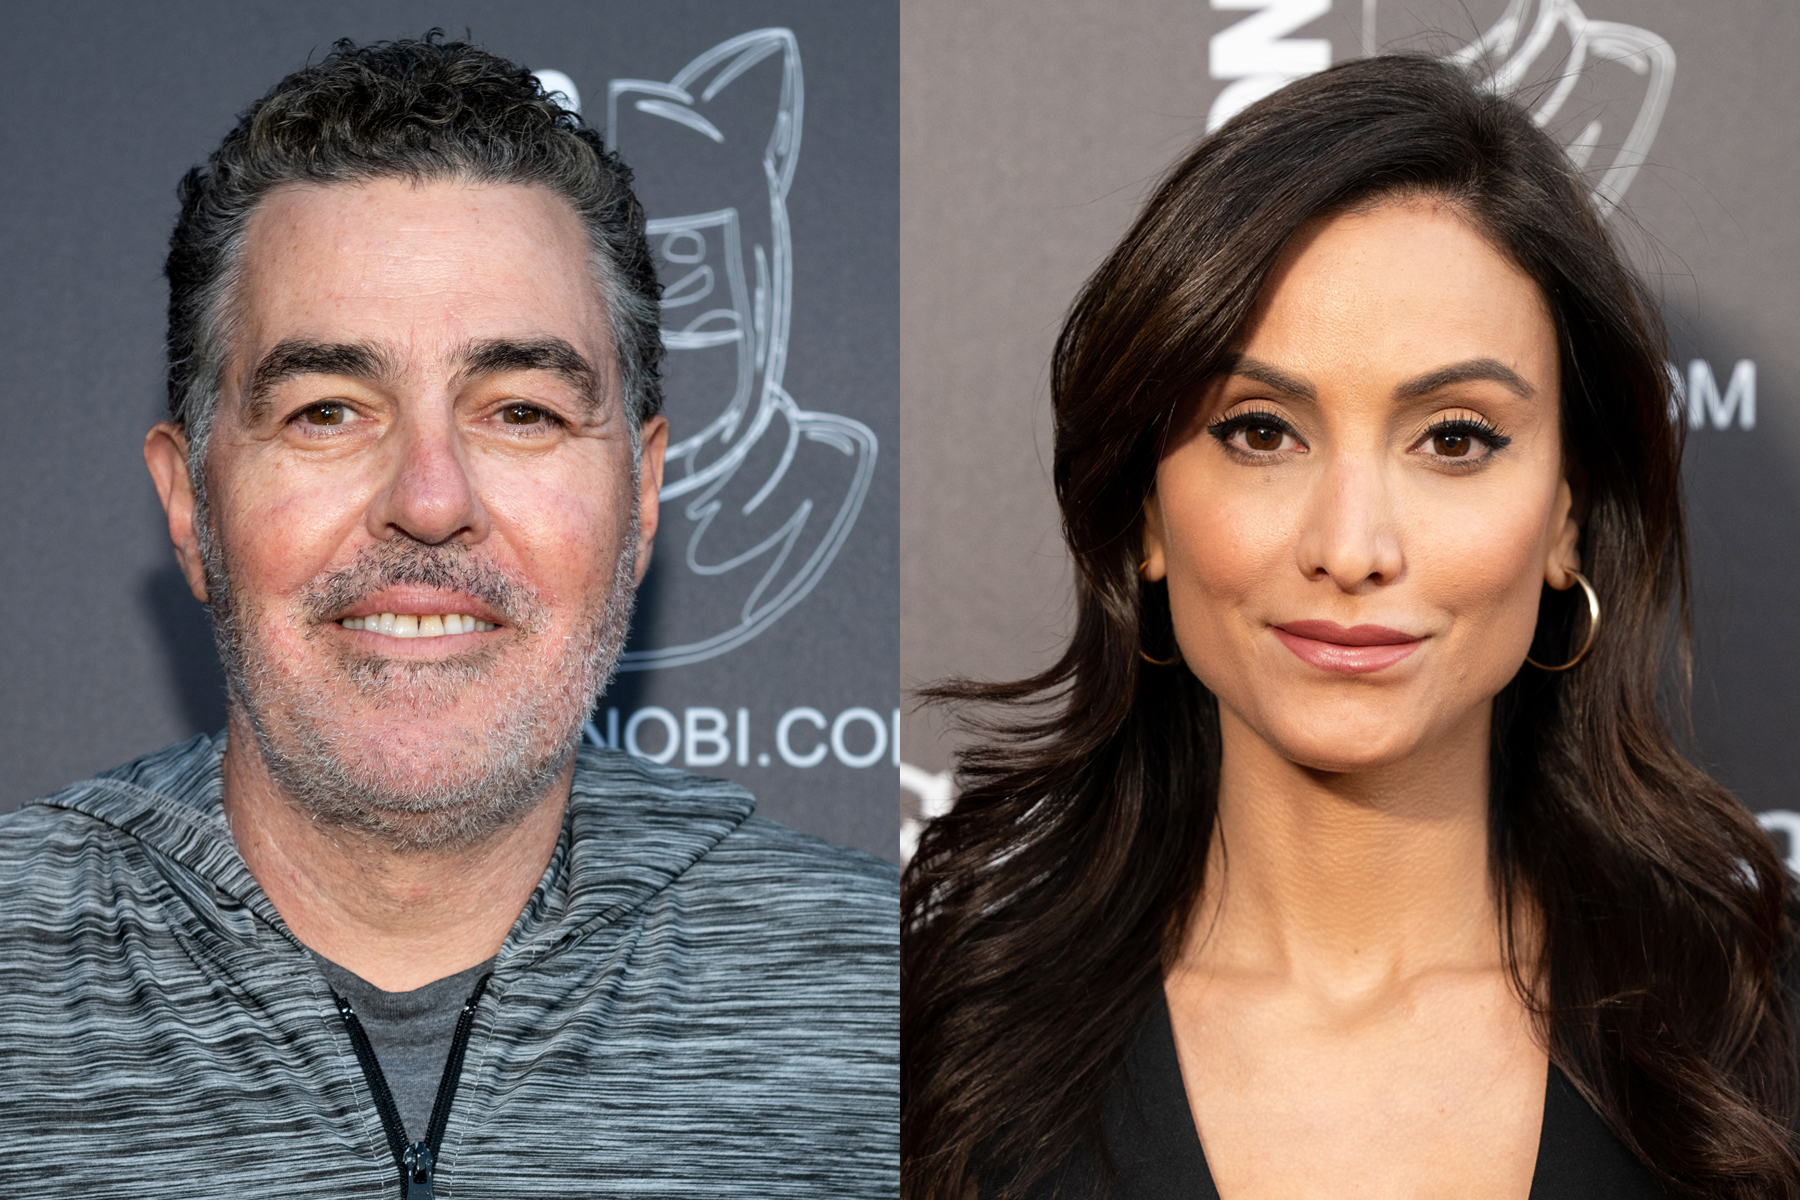 <p><span>After splitting with his wife of nearly two decades in 2021, comedian and radio host Adam Carolla moved on with Crystal Marie Denha -- a stand-up comic and actress who's 20 years his junior -- in the fall of 2022. "They've been together a few months now," a source told </span><a href="https://pagesix.com/2022/12/18/adam-carolla-dating-sexy-standup-crystal-denha-after-divorce/">Page Six</a><span> in December 2022 of Adam, who was 58 when they started dating, and Crystal, who was 38 at the time.</span></p>